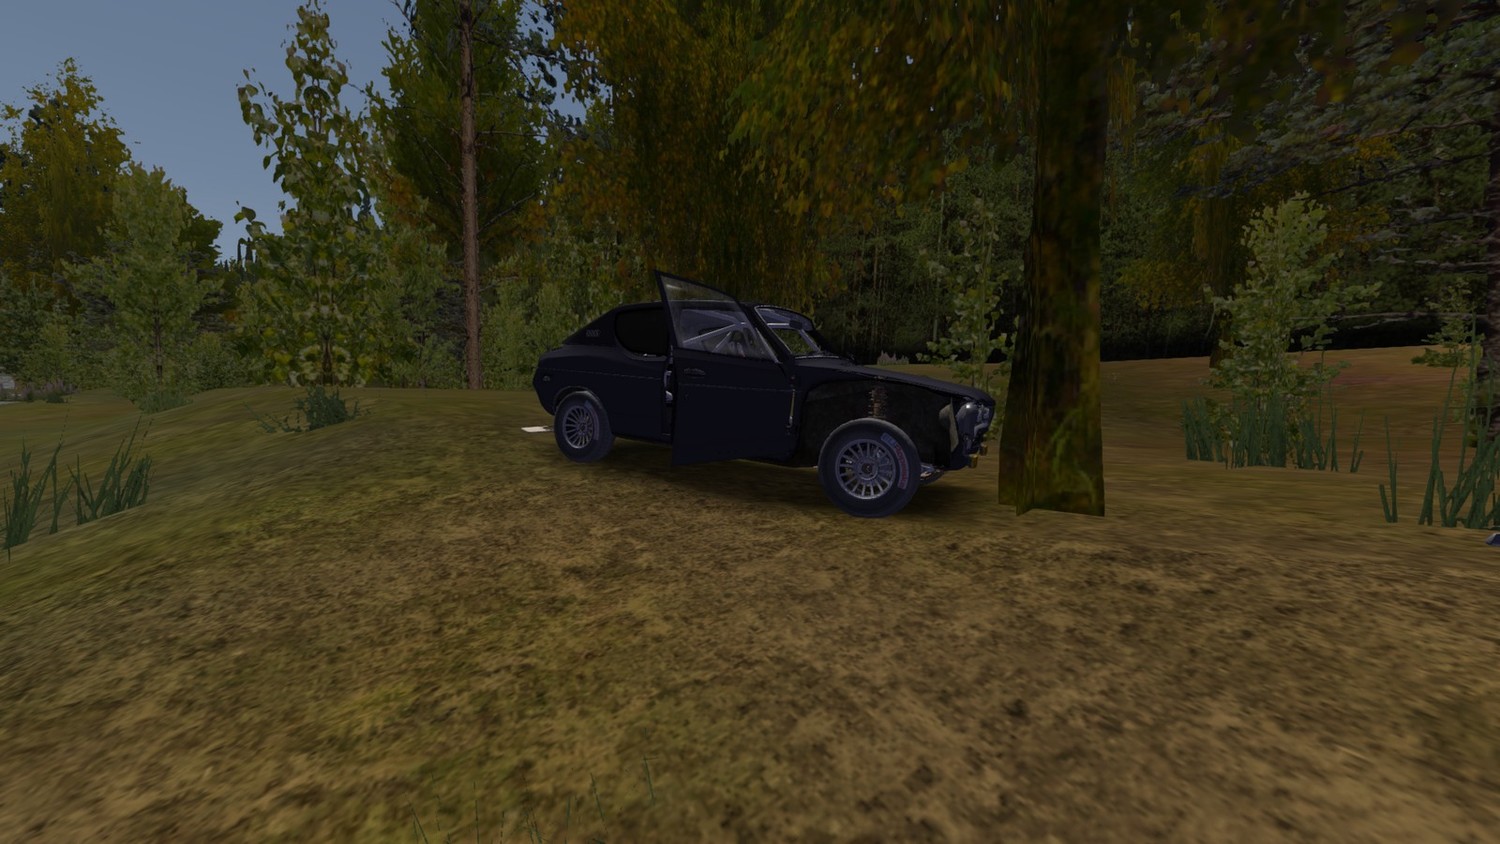 My Summer Car: SaveGame (Quest, a terrible accident one morning)